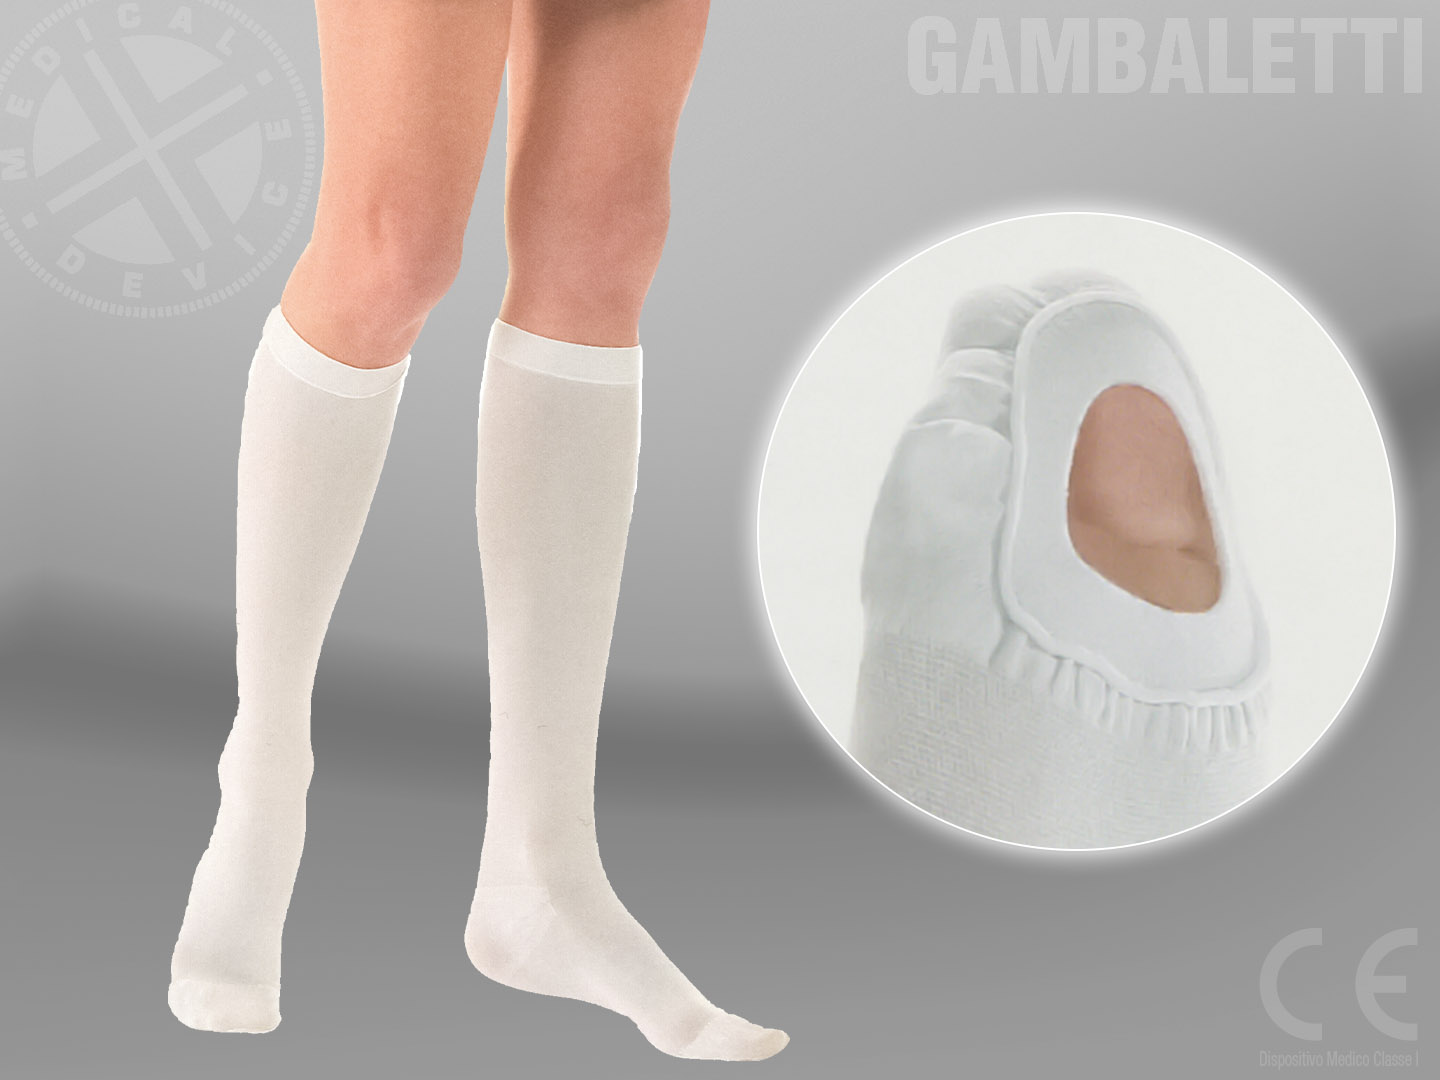 elly anti-embolism knee-highs apply the clinically-proven graduated pressure